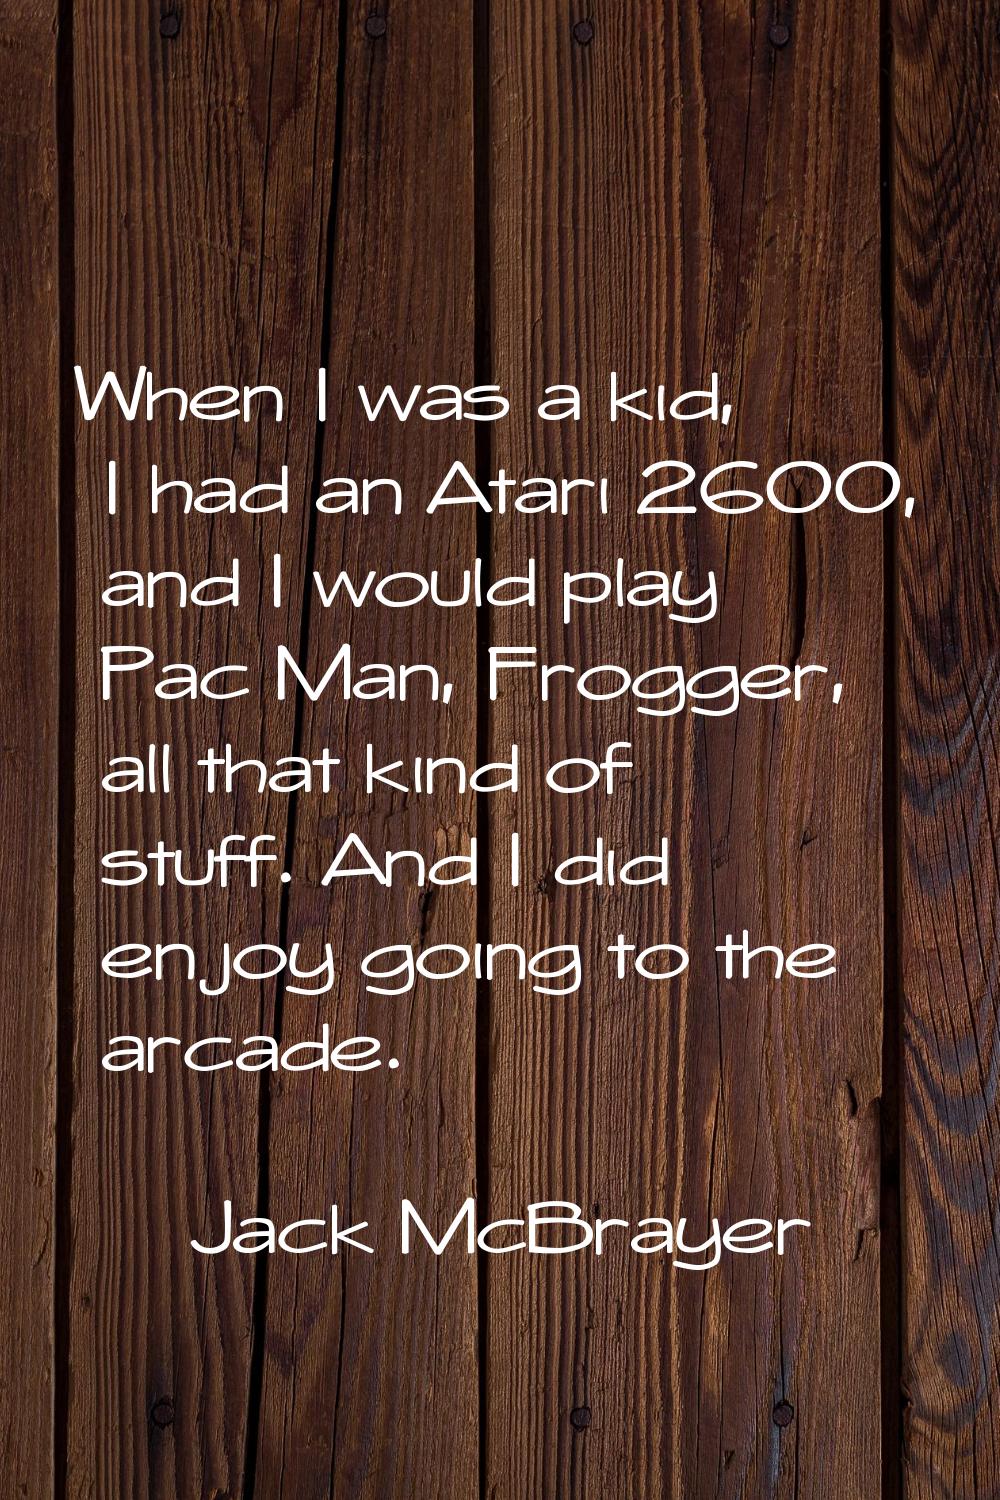 When I was a kid, I had an Atari 2600, and I would play Pac Man, Frogger, all that kind of stuff. A